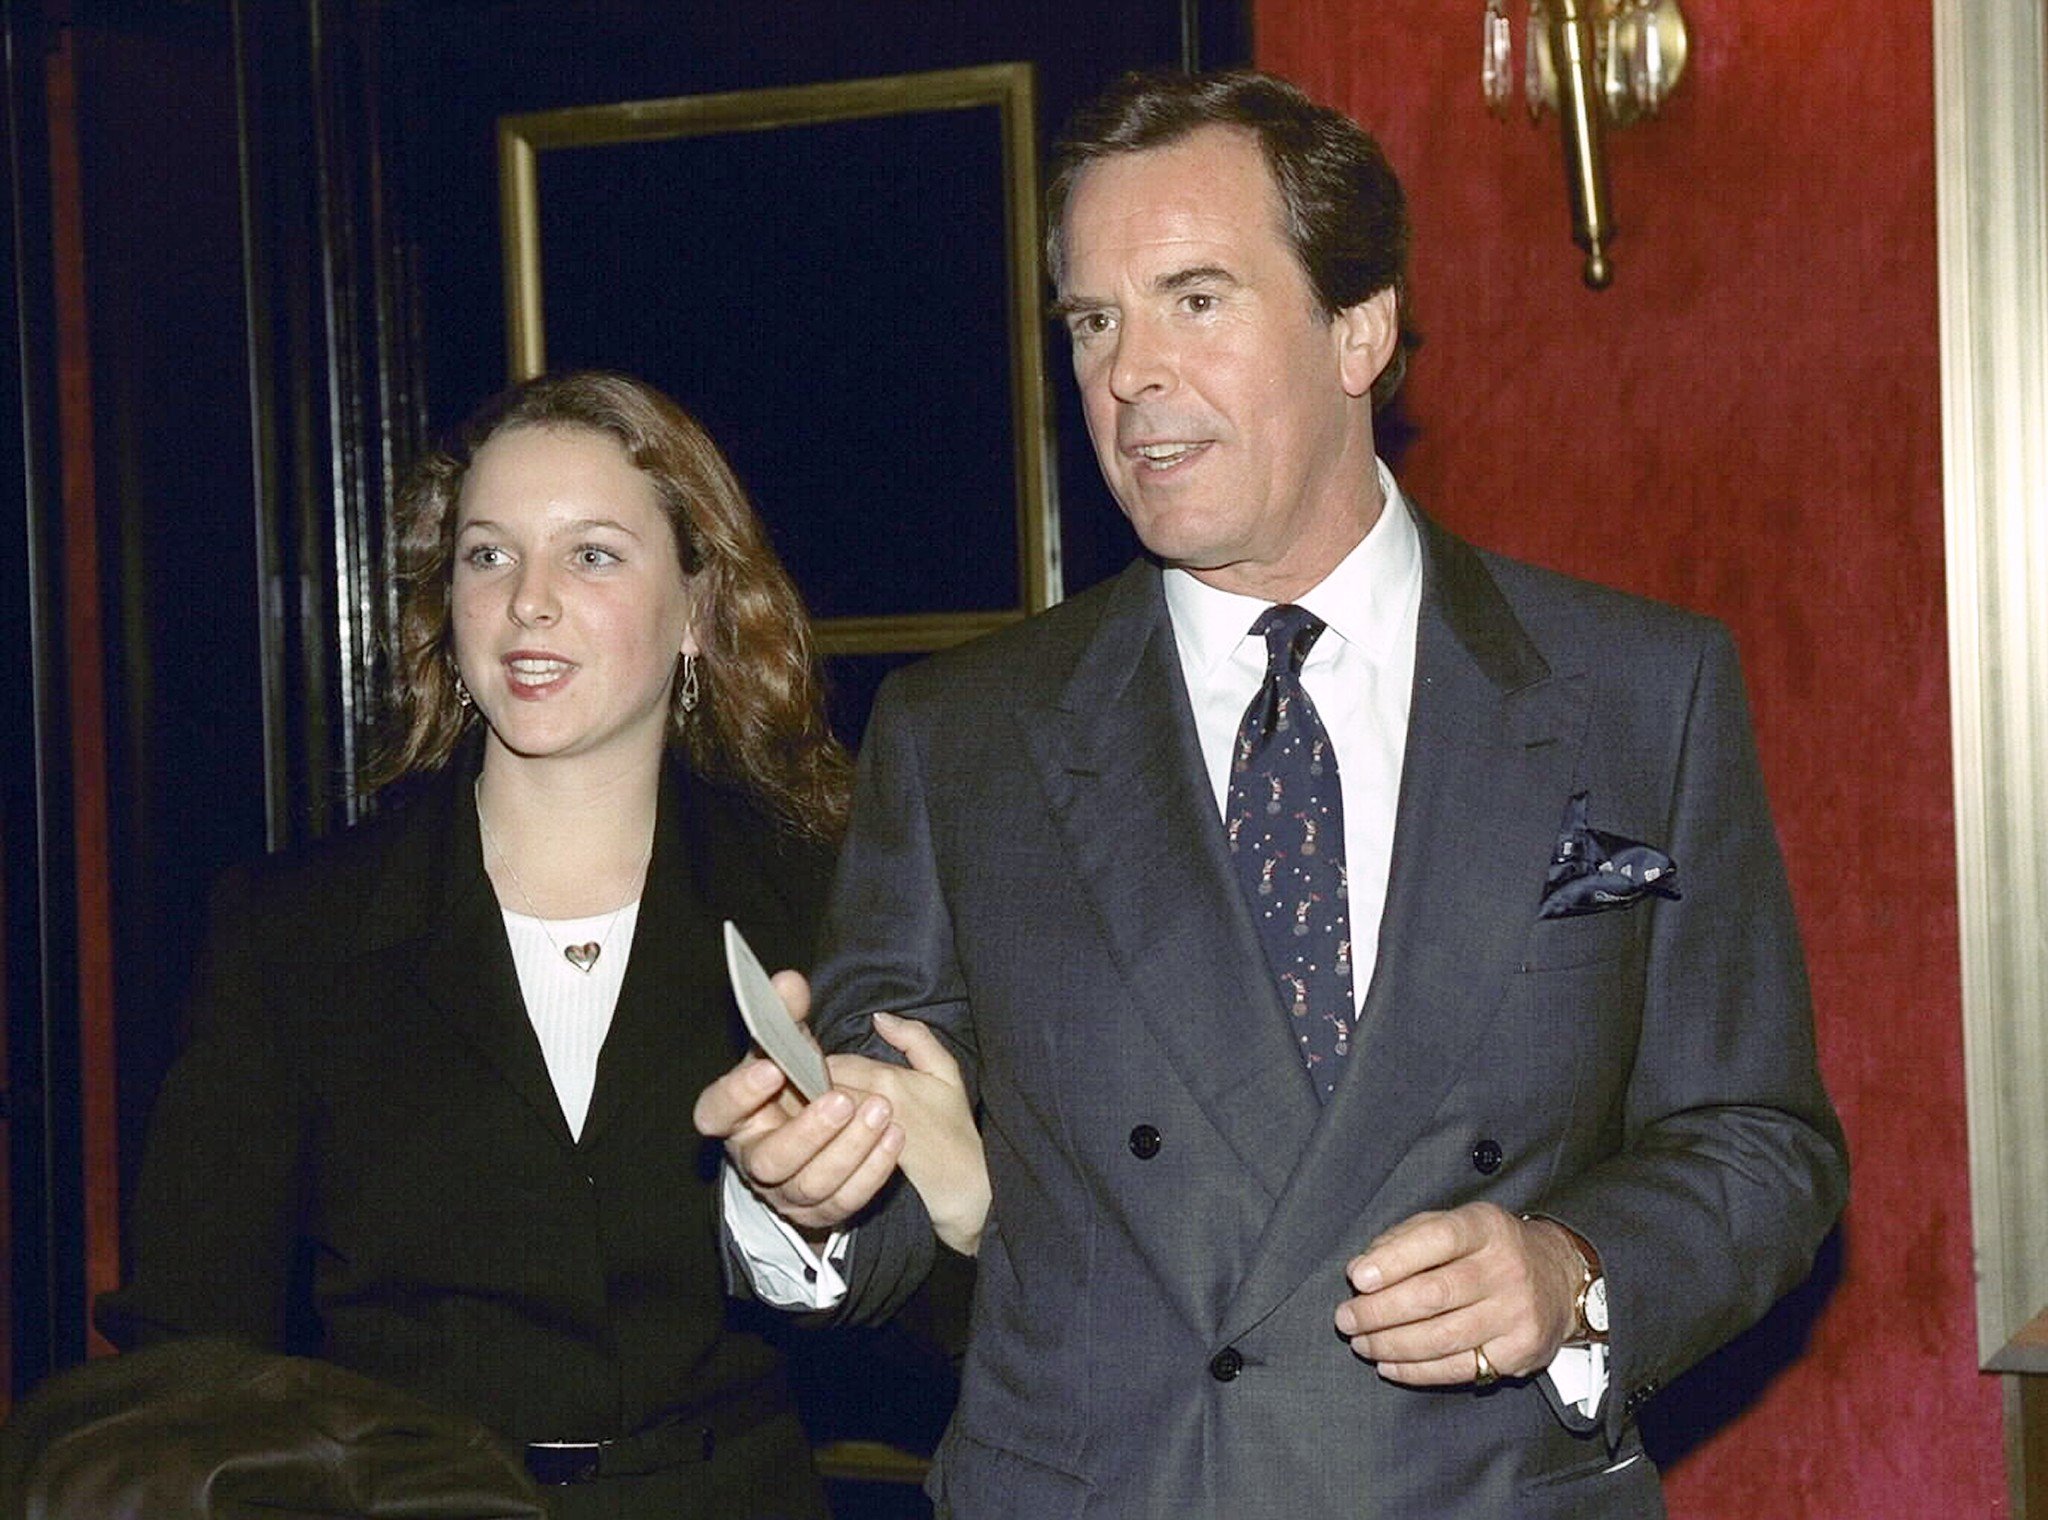 TV news announcer Peter Jennings and daughter attending the premiere of ''Cry, the Beloved Country,'' at the Ziegfeld Theater | Source: Getty Images